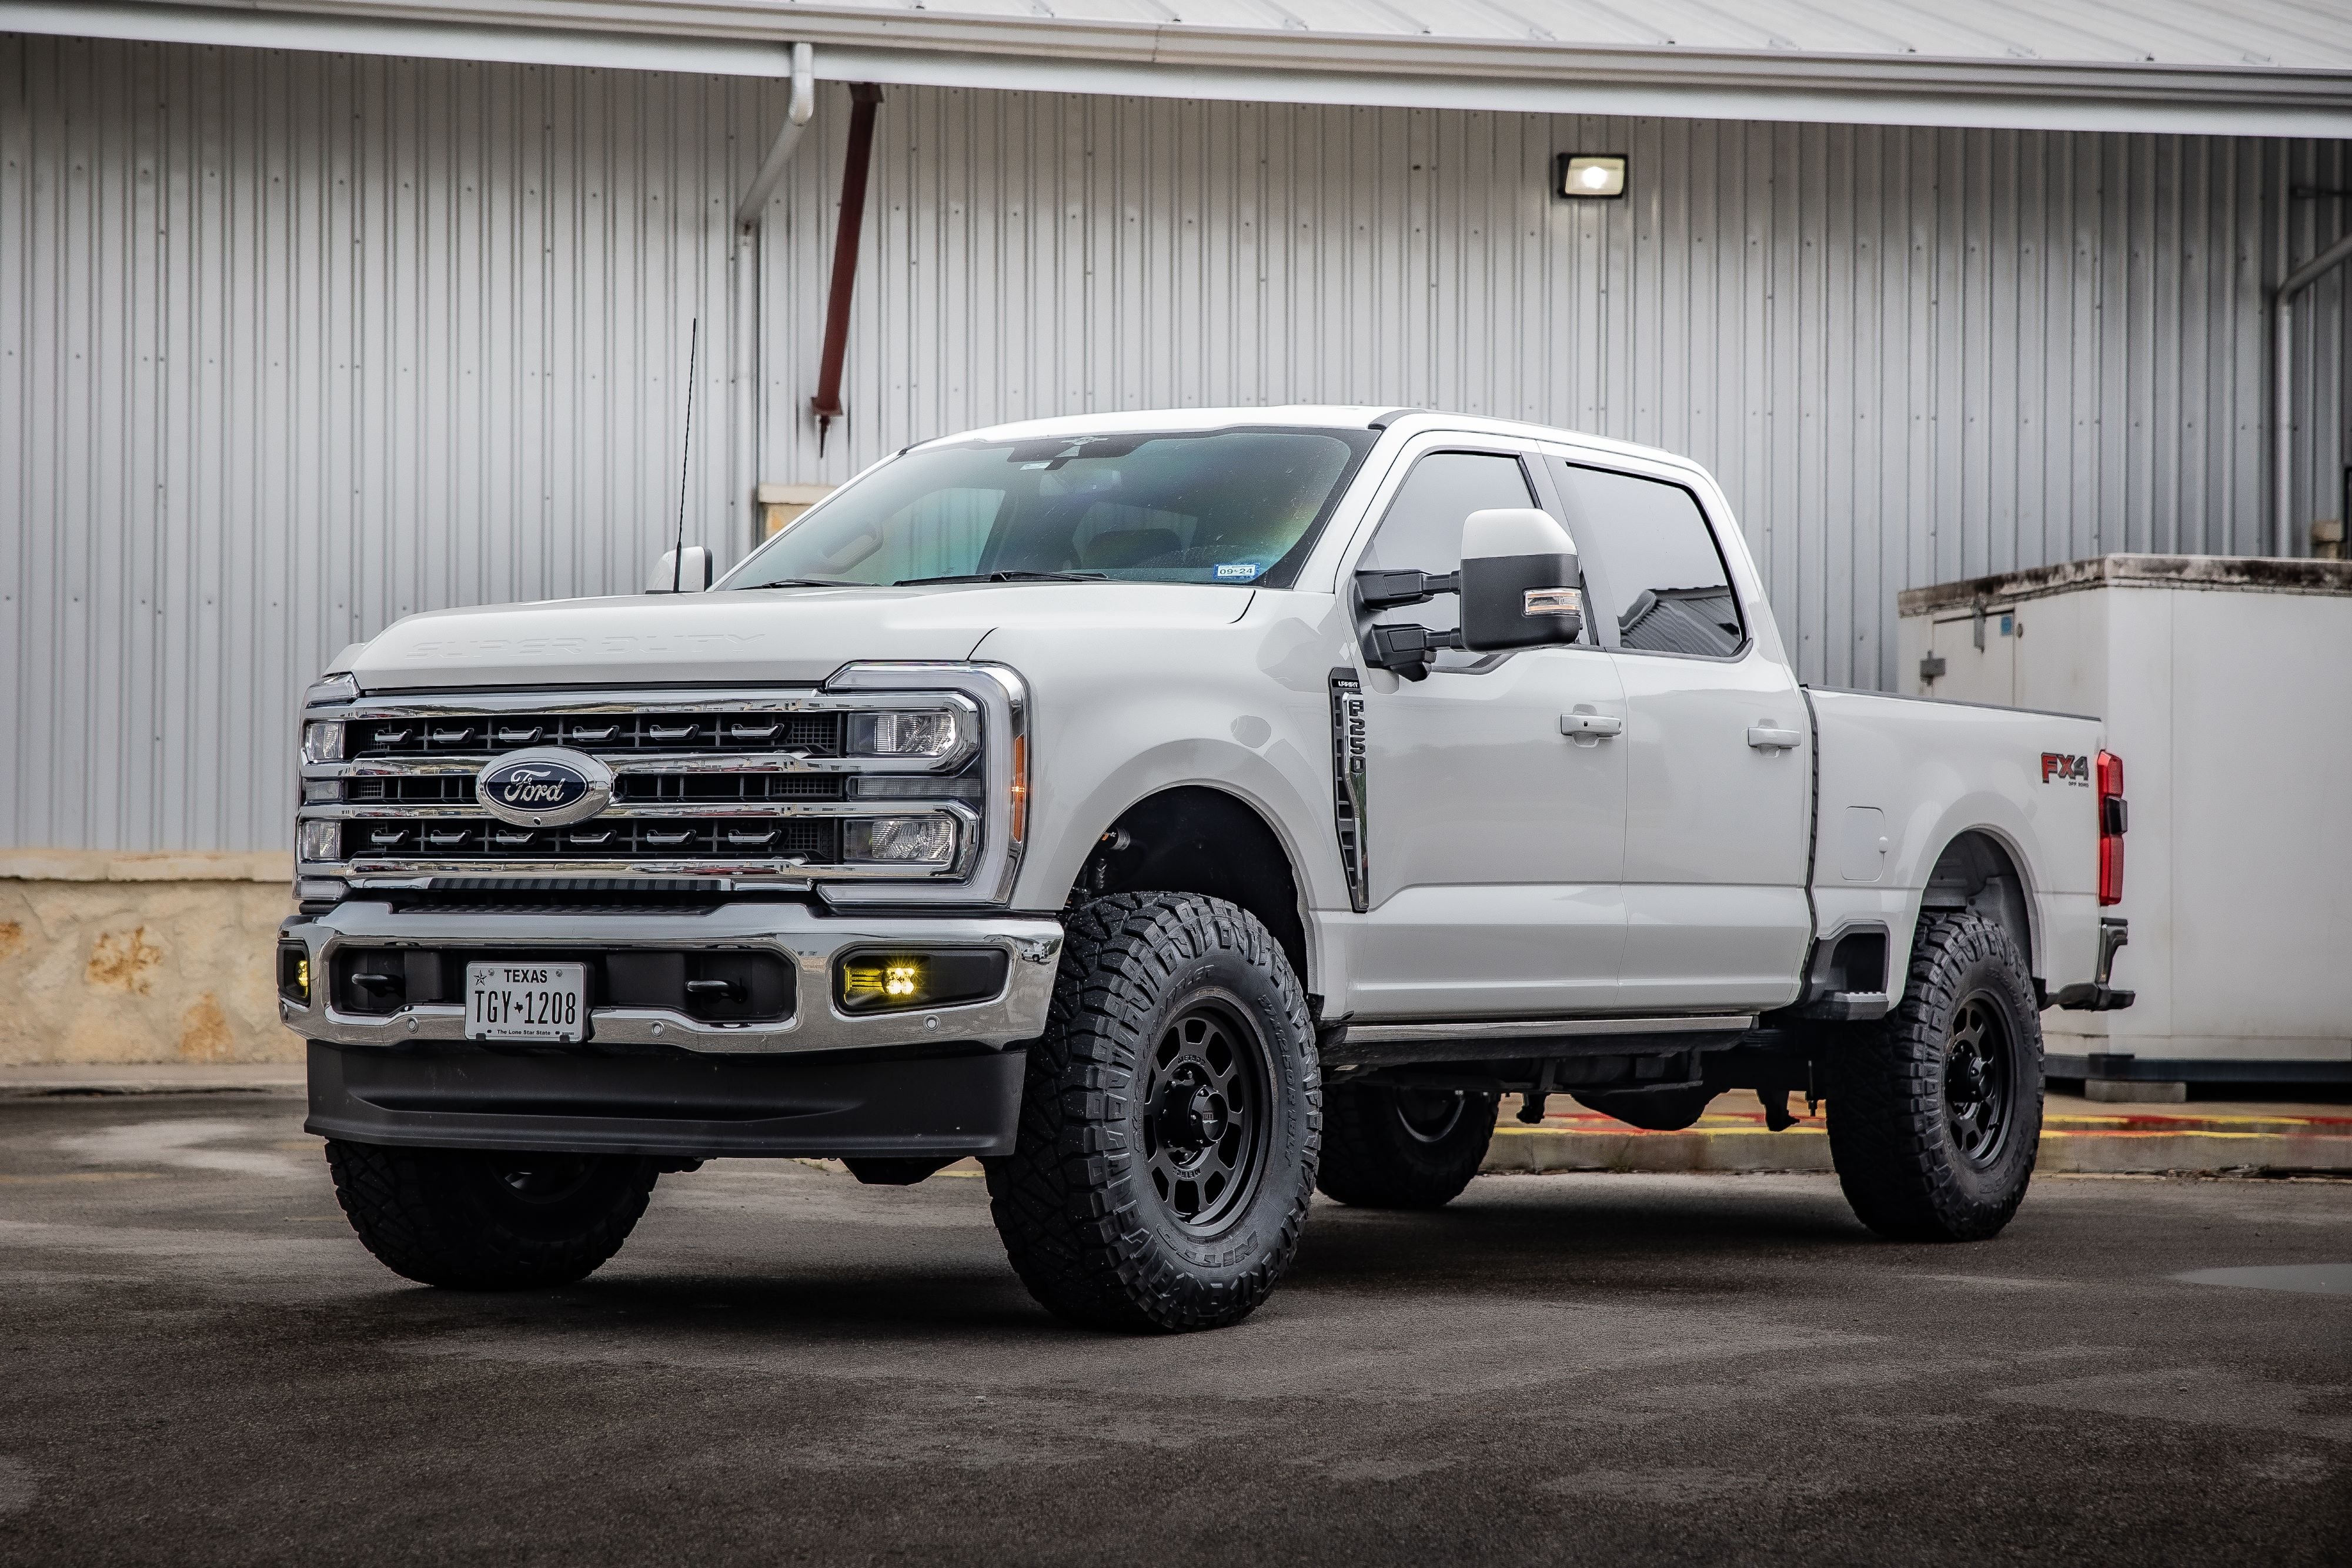 2023 Ford F-250 Super Duty Lariat in White with Carli 3.5" Backcountry Suspension Kit, Carli 3.5" Full Rear Spring Replacement, Carli High Mount Steering Stabilizer, Carli Low Mount Steering Stabilizer, Carli Torsion Sway Bar, Carli Fabricated Radius Arms, Method MR705 18x9" Wheels, 37x12.50R18 Nitto Ridge Grappler Tires, Spray in Bedliner